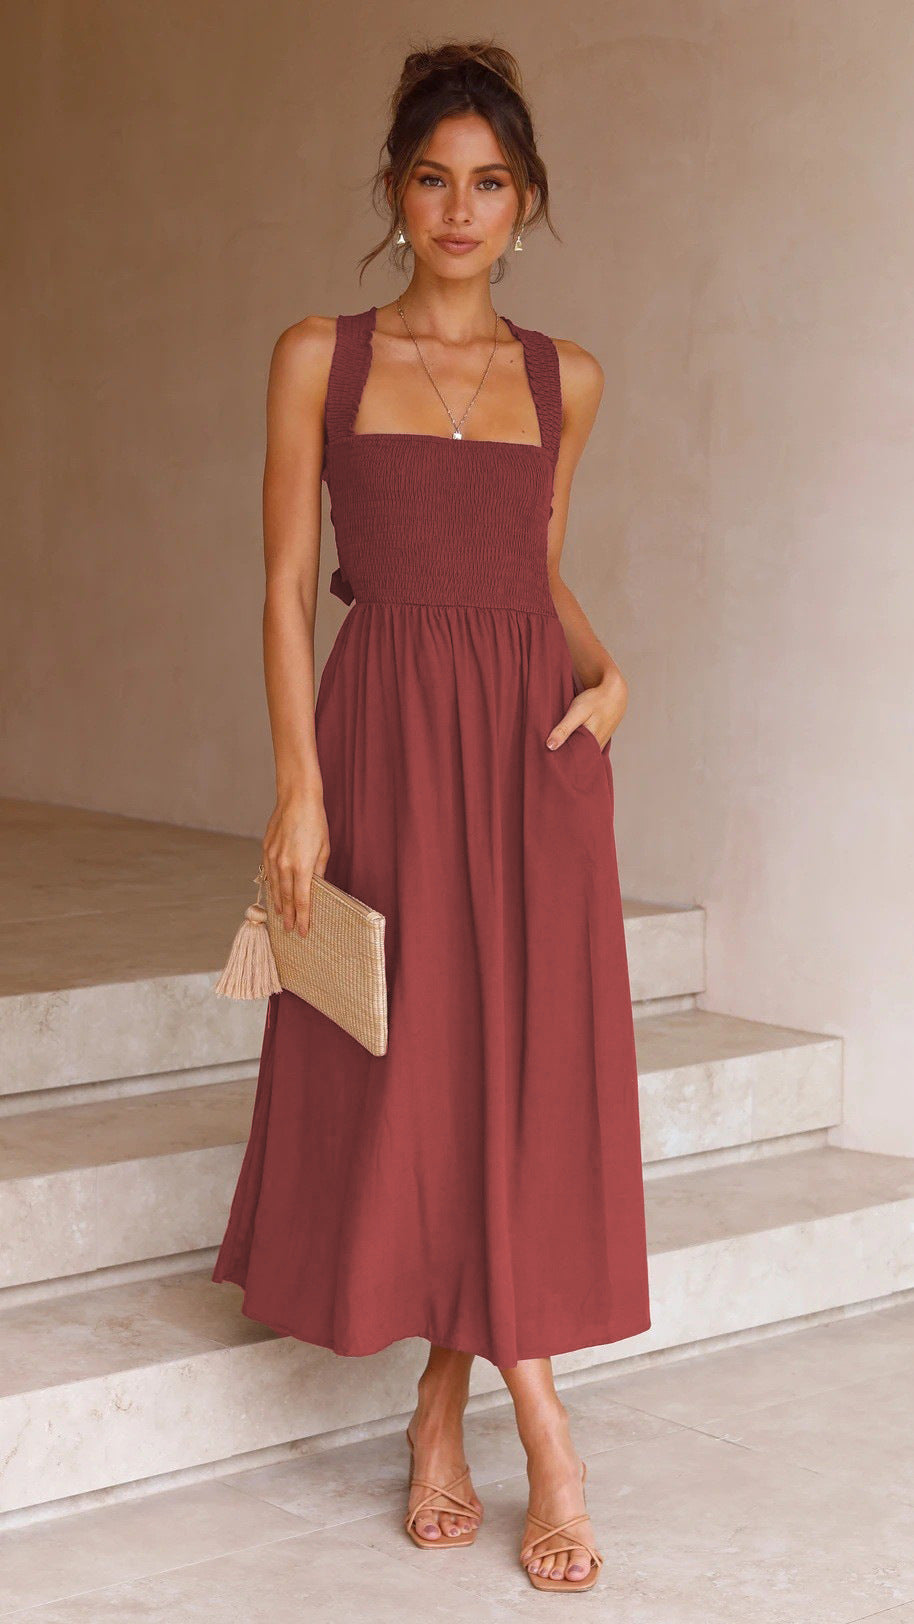 Chic Round Neck Solid Color Dress with Waist Belt